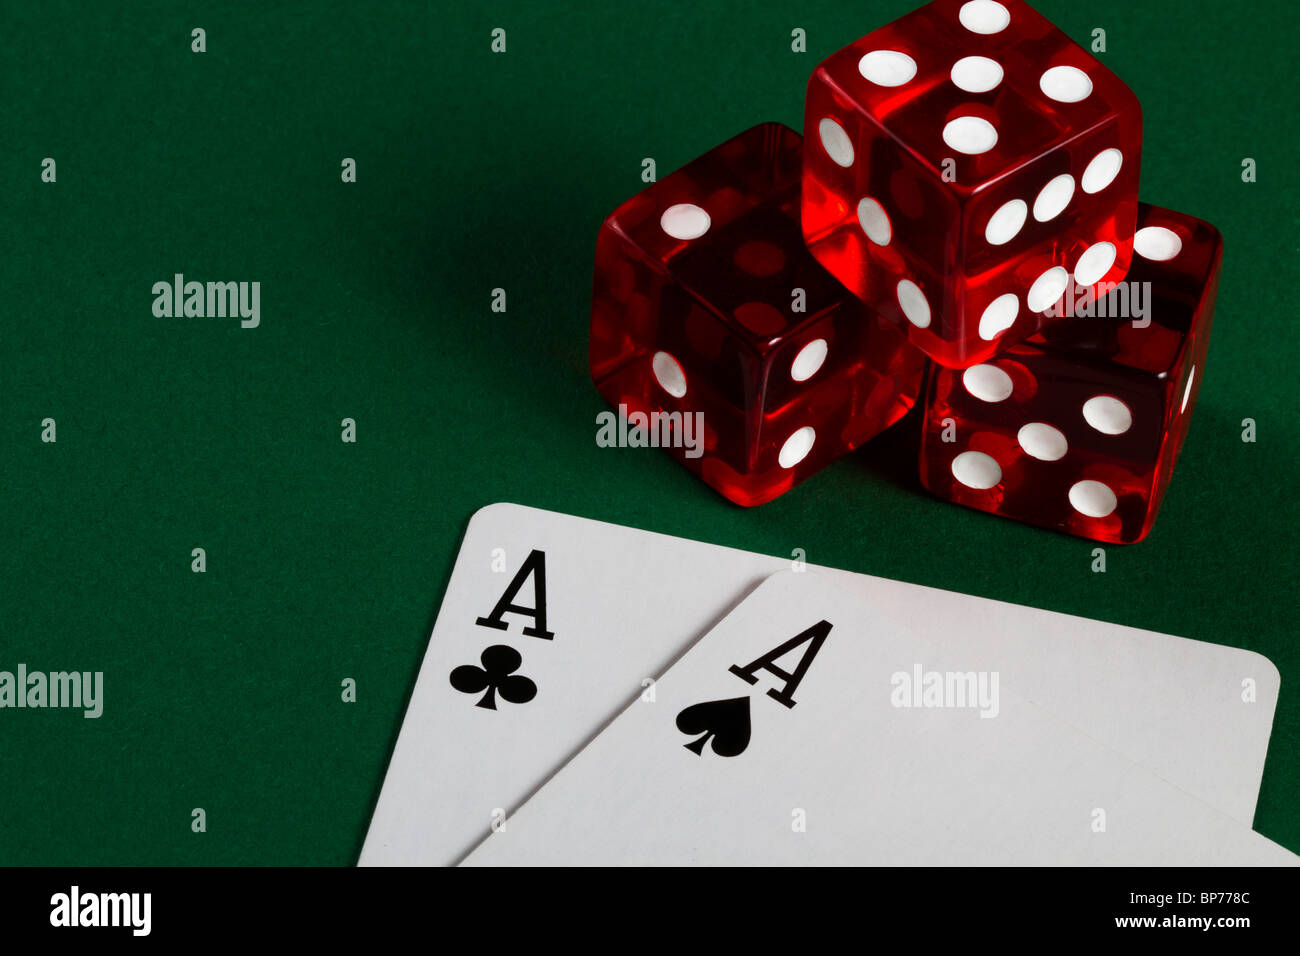 two aces and three dices on green background Stock Photo